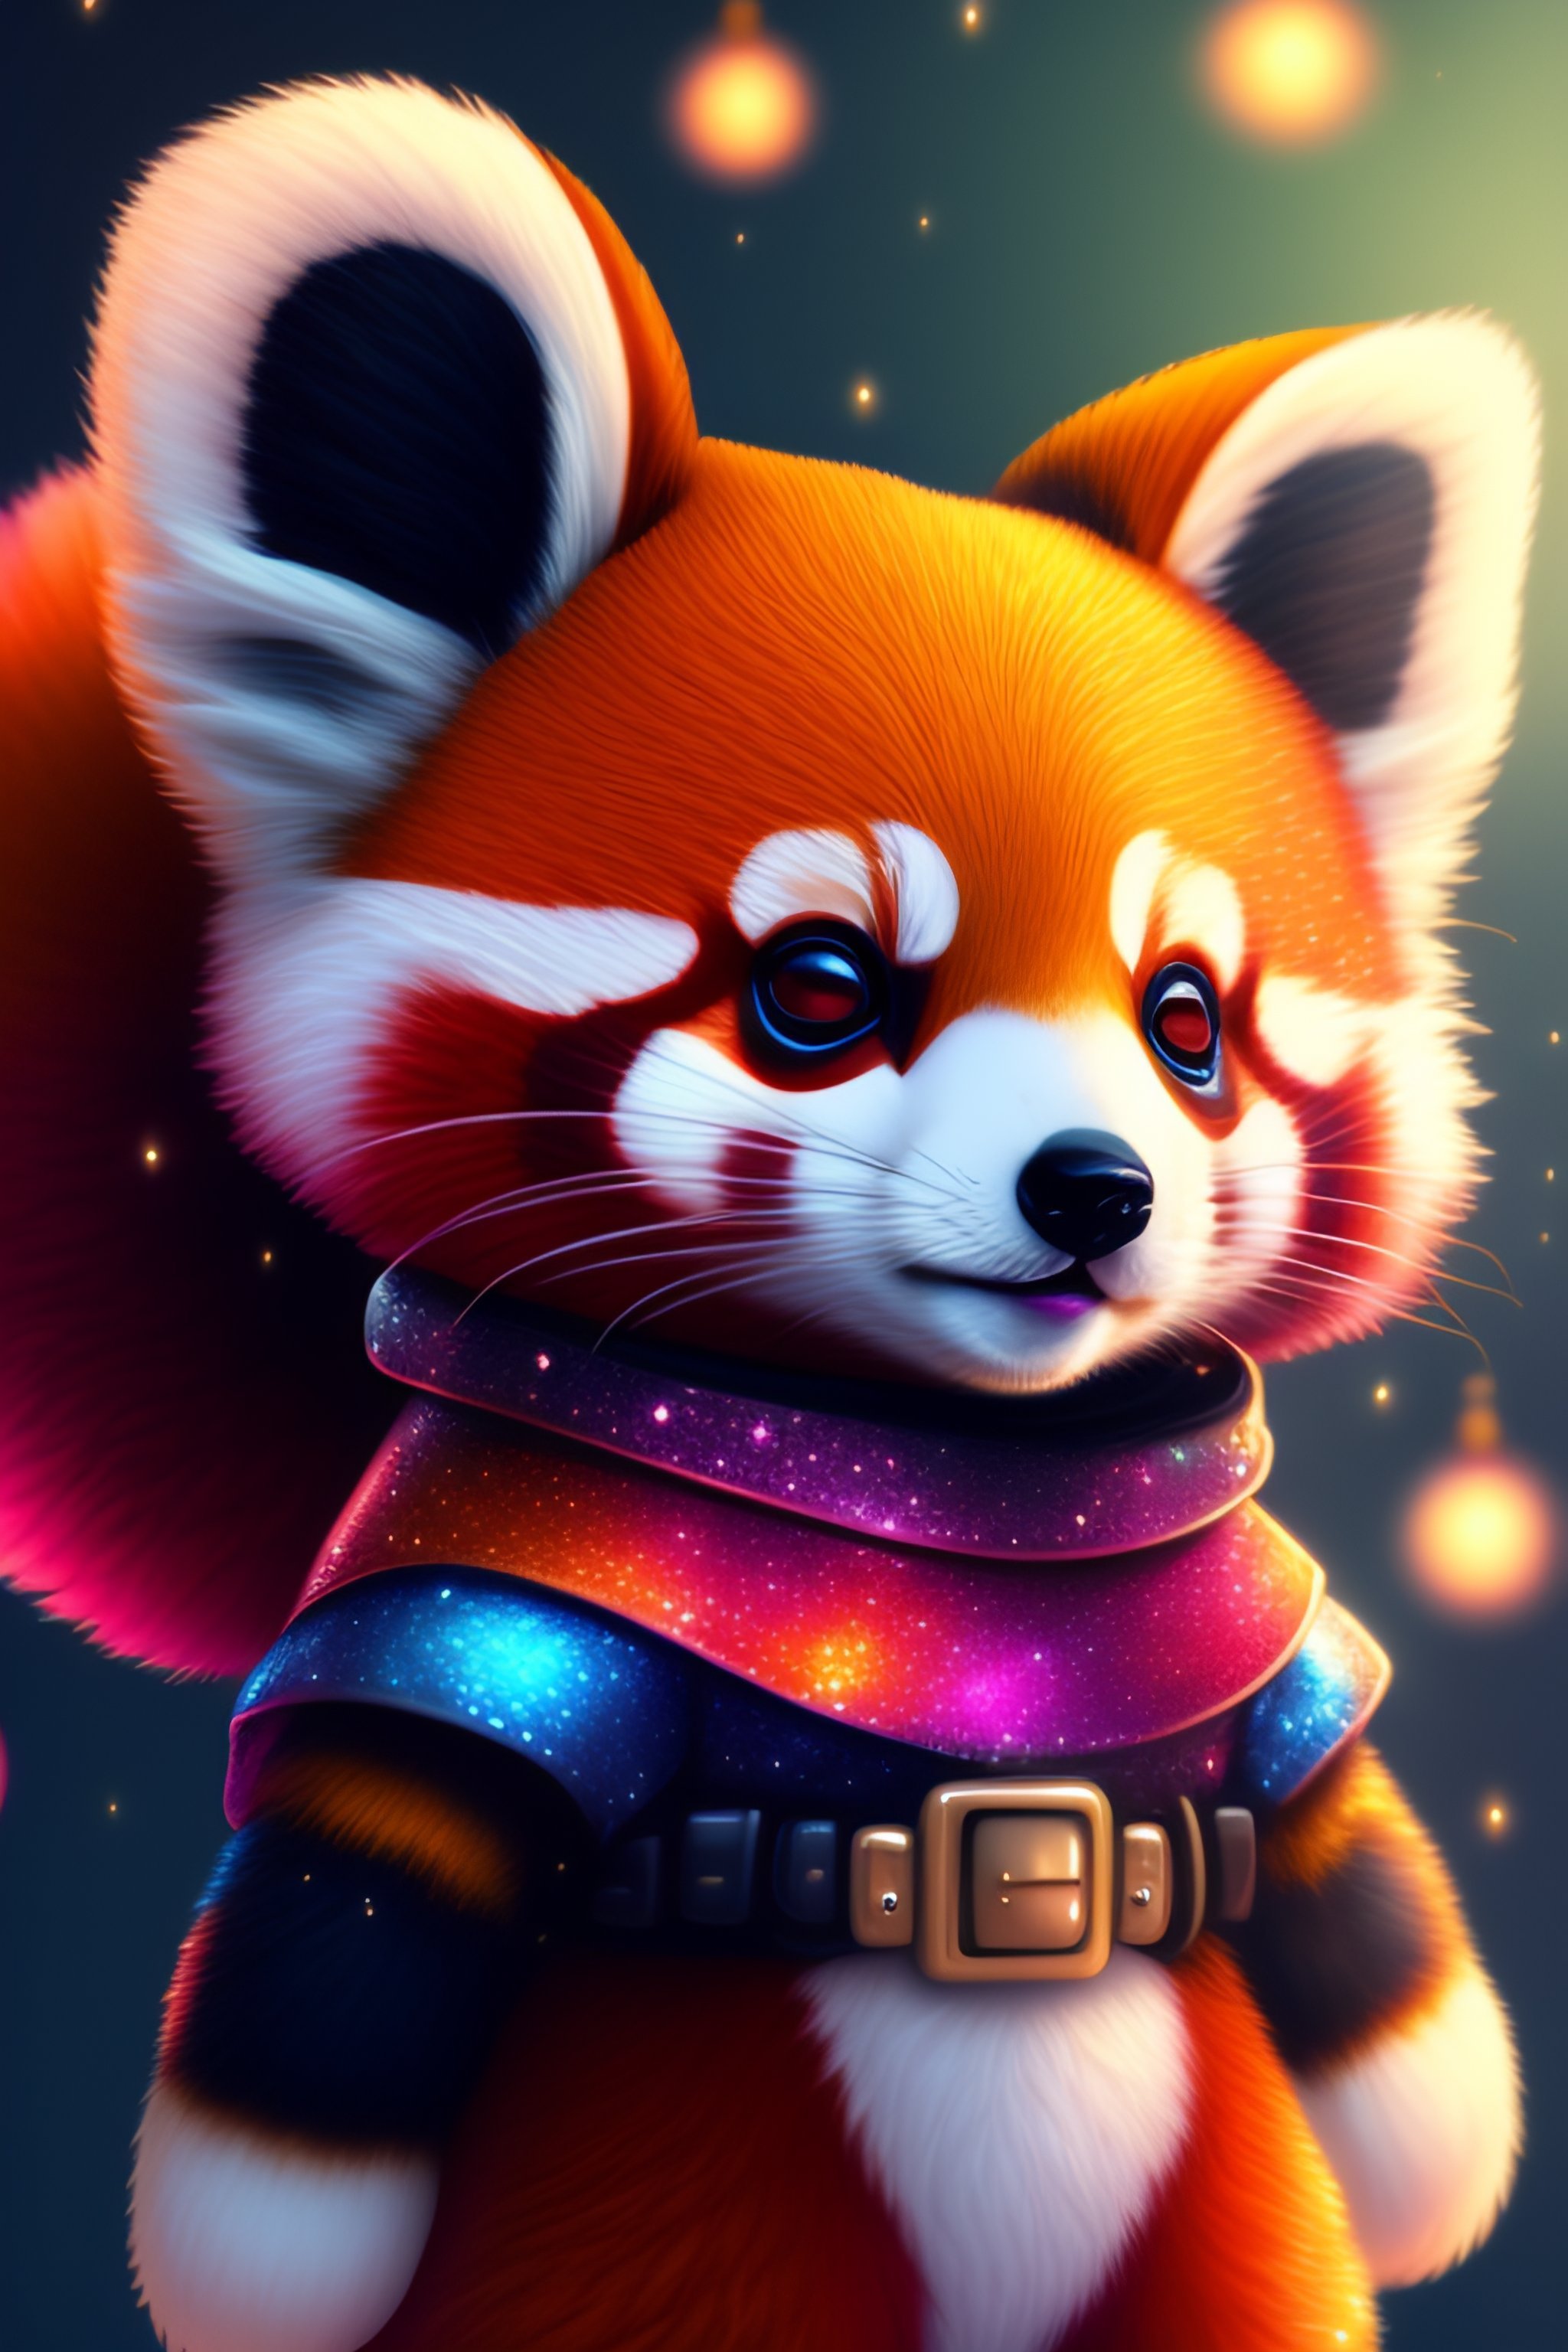 CUTE AND ADORABLE CARTOON FLUFFY RED PANDA, SPACE, FANTASY, GLITTER, PARTY, DREAMLIKE, SURREALISM, SUPER CUTE, TRENDING ON ARTSTATION